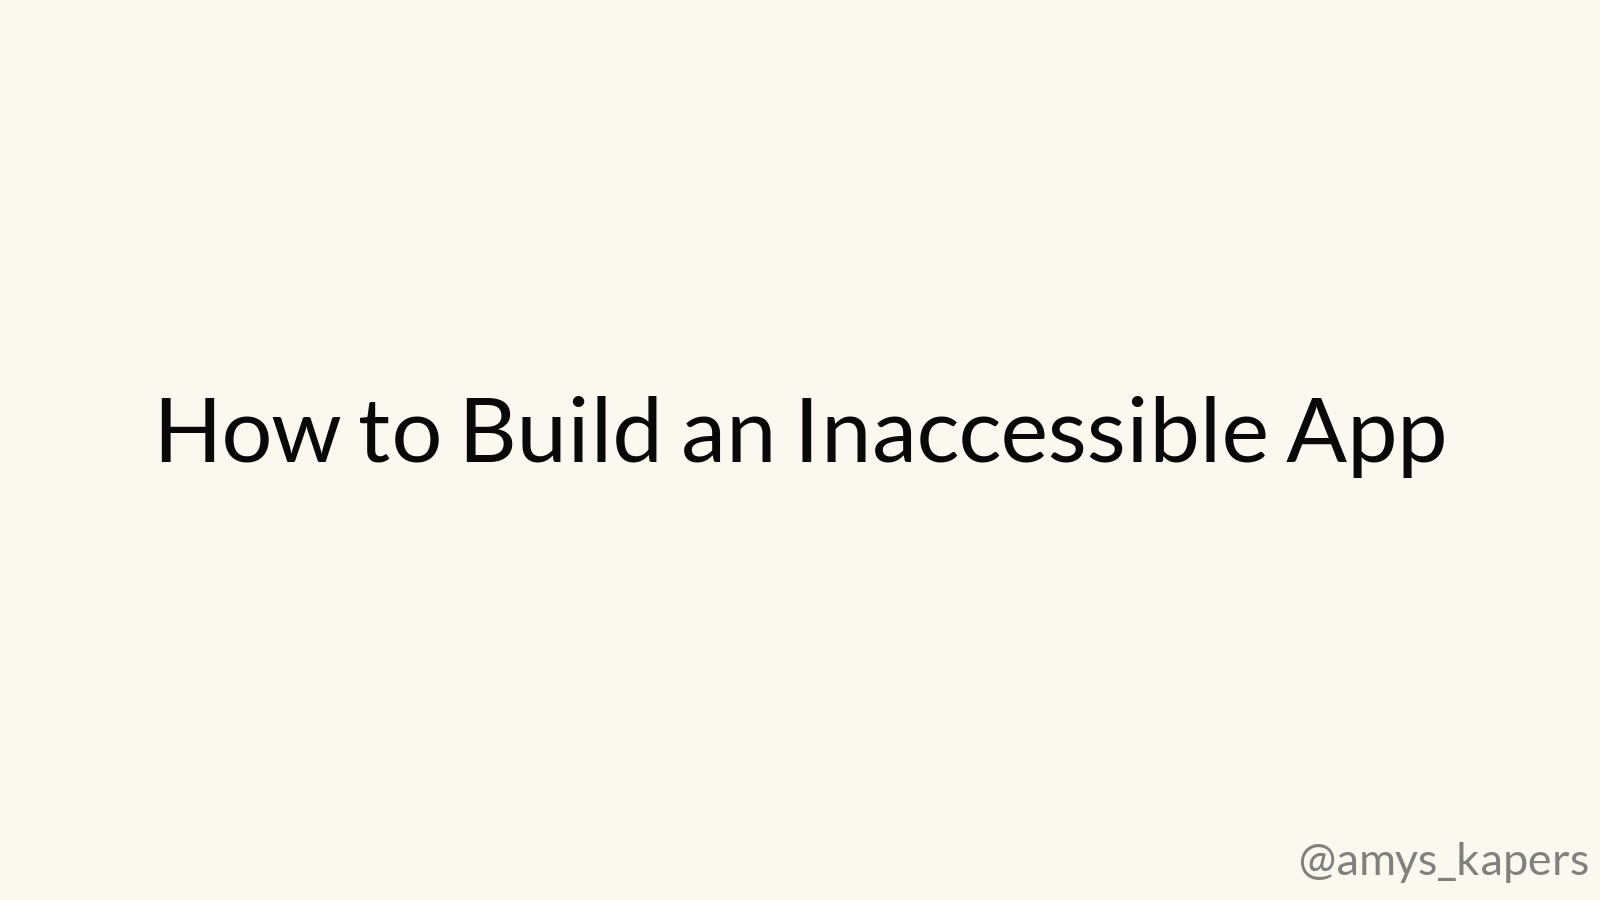 How to Build an Inaccessible App